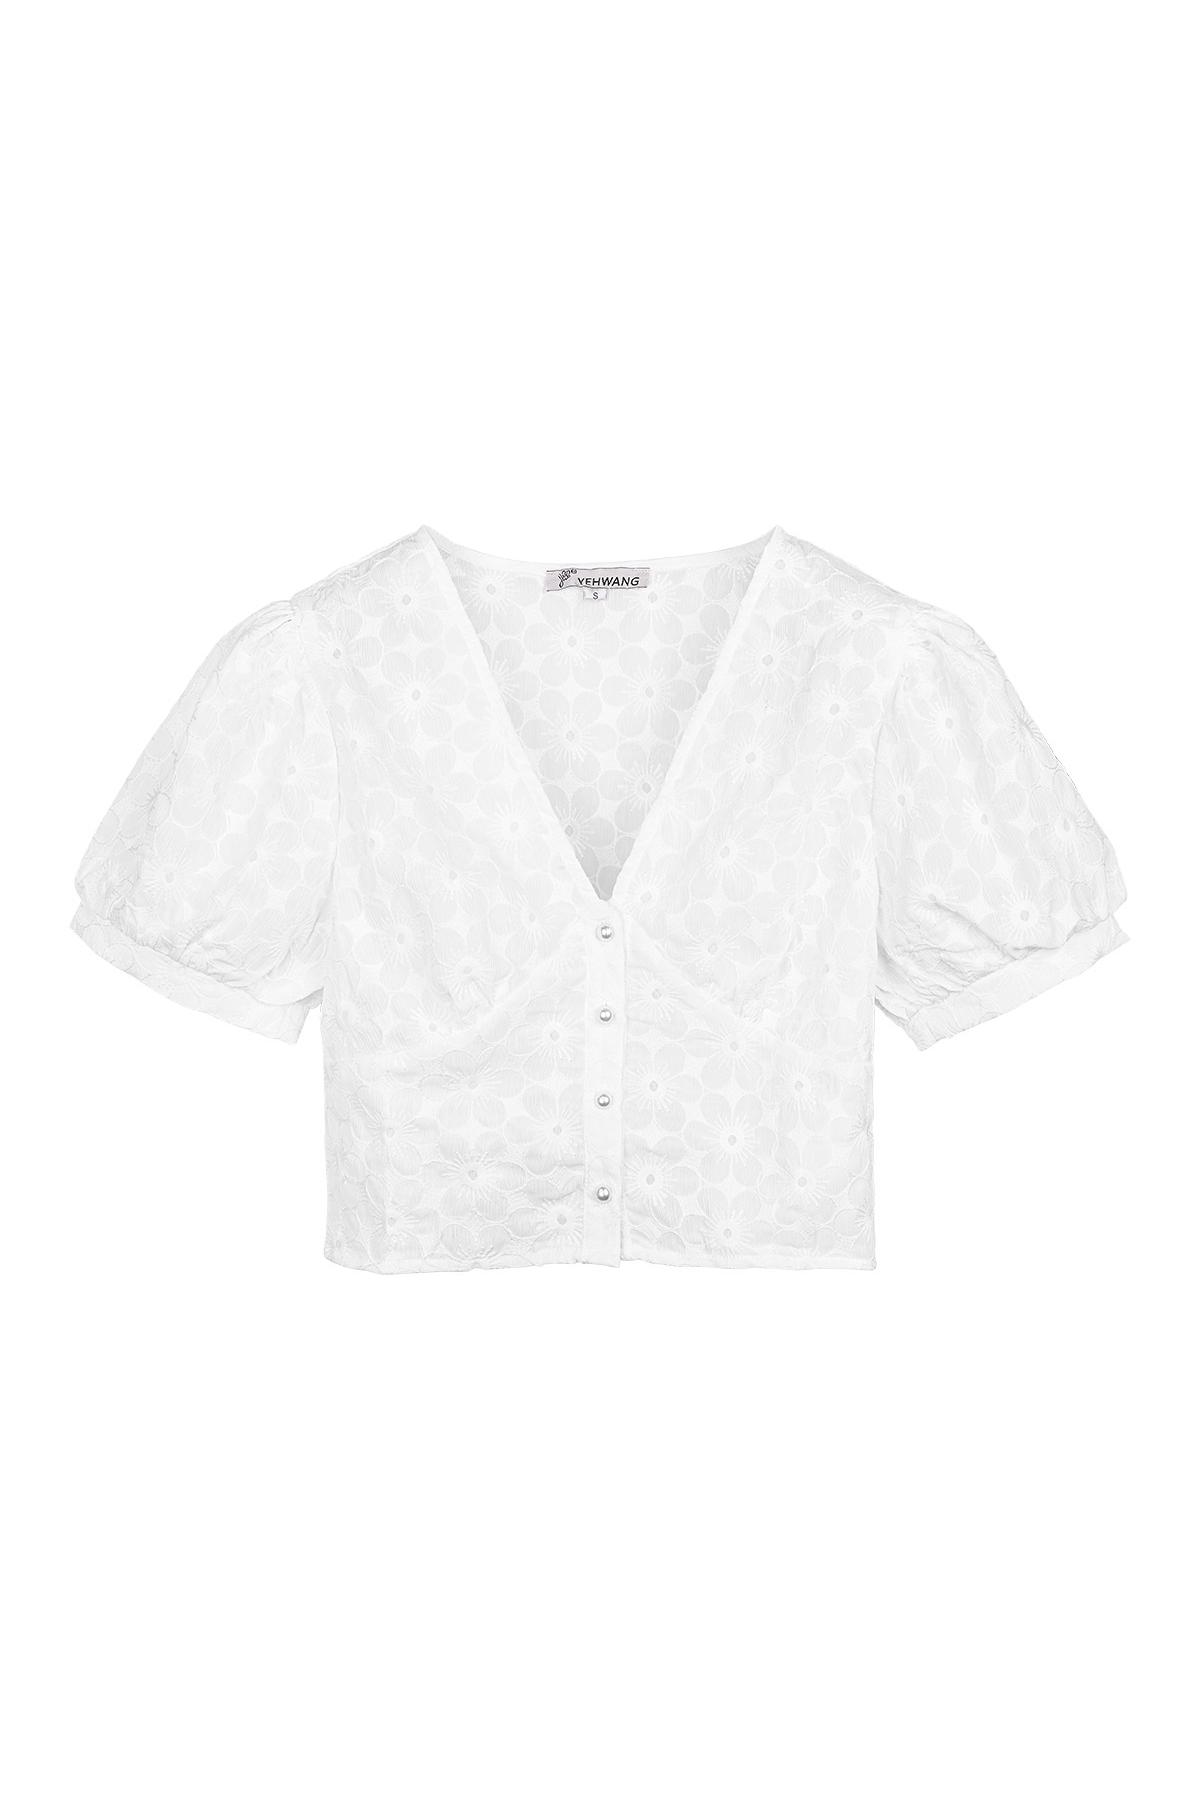 Blouse crop top White S 